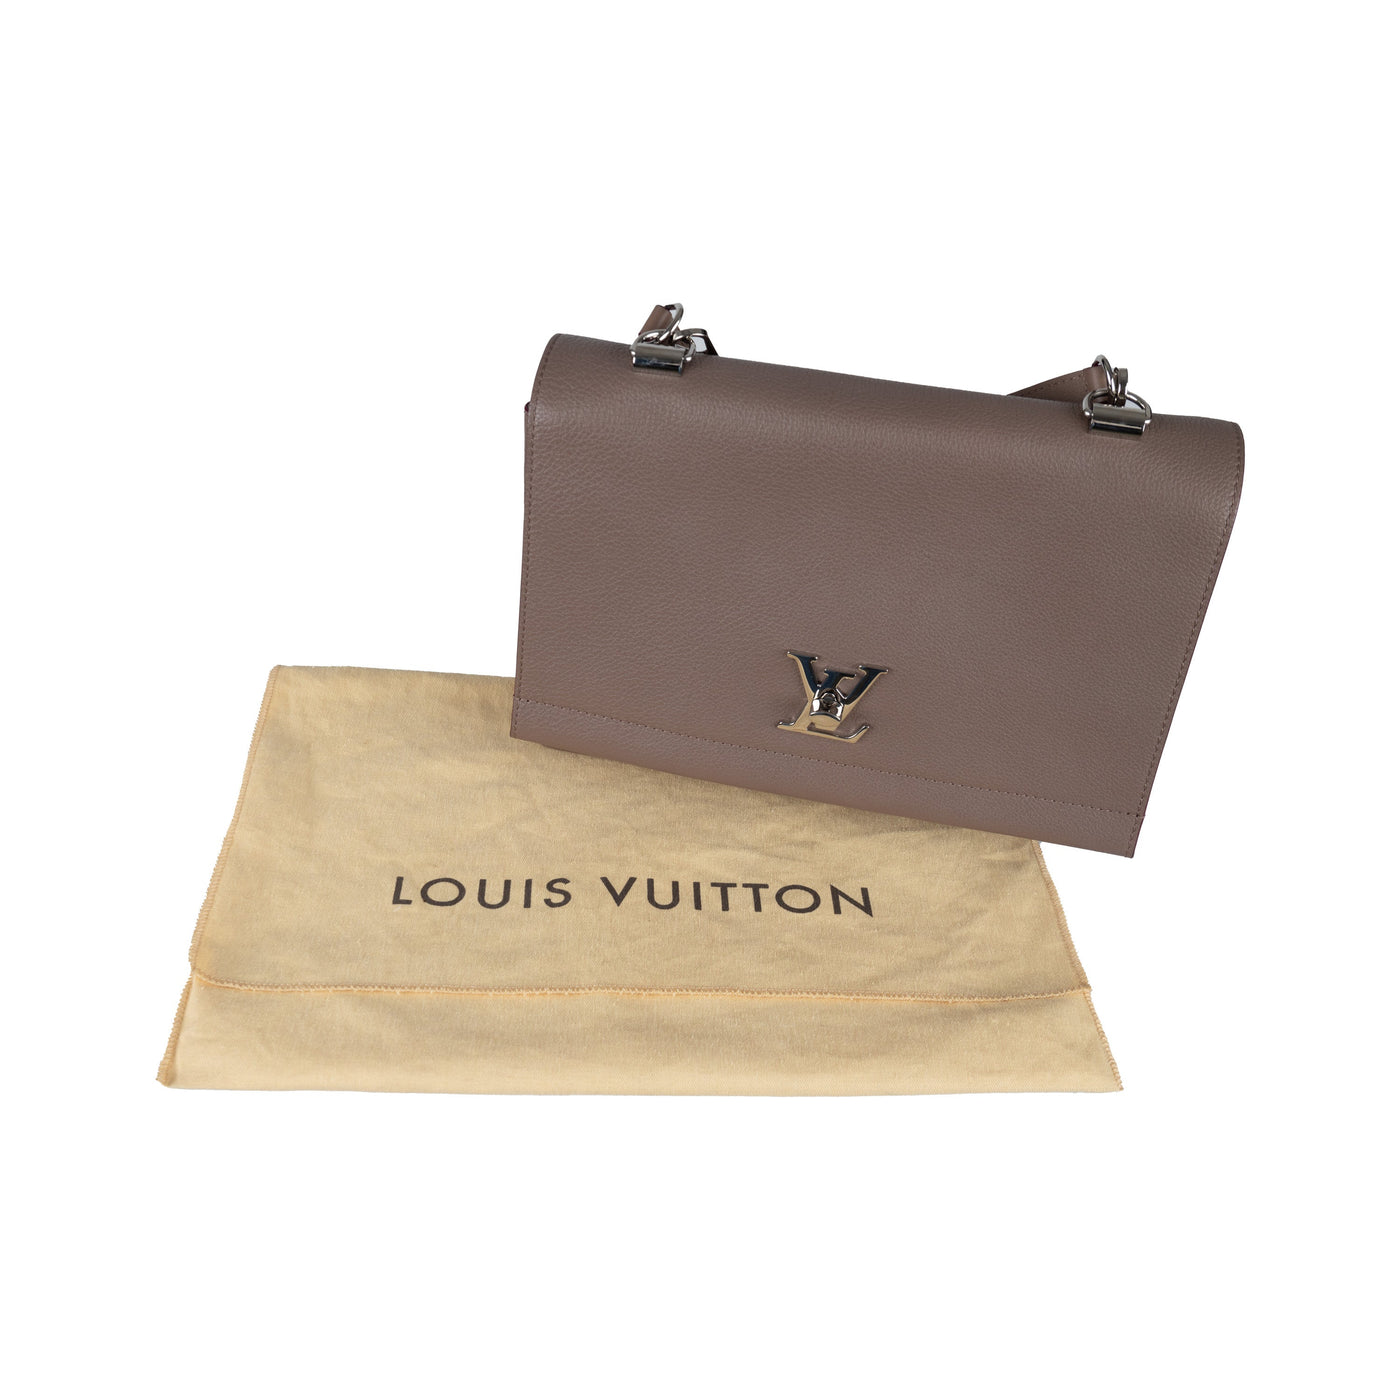 Changing out my Louis Vuitton Bags: What fits inside the LV Lockme